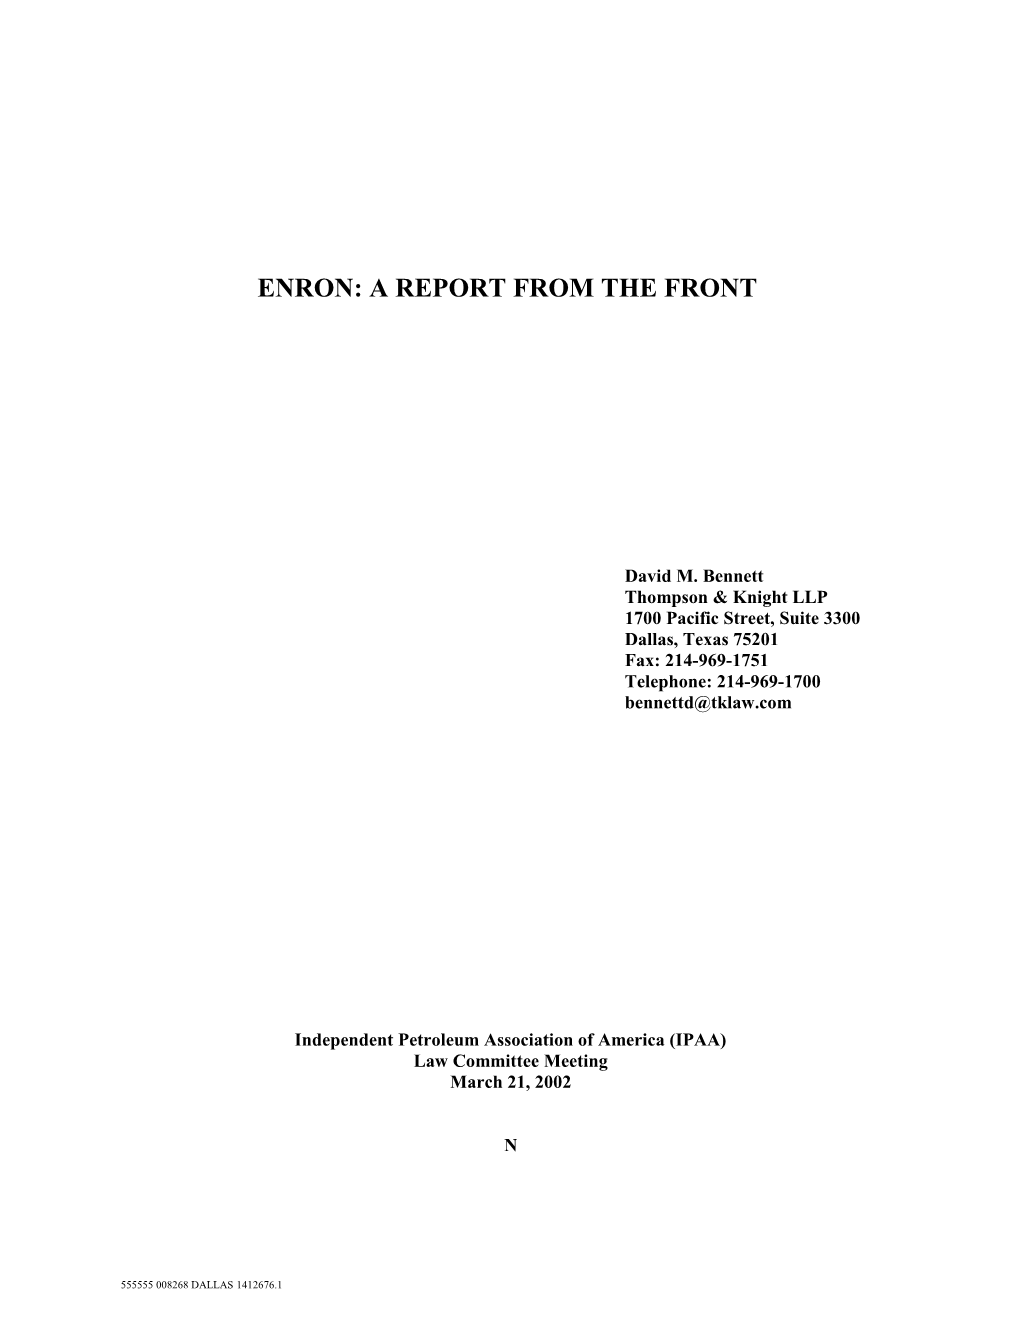 Enron: a Report from the Front